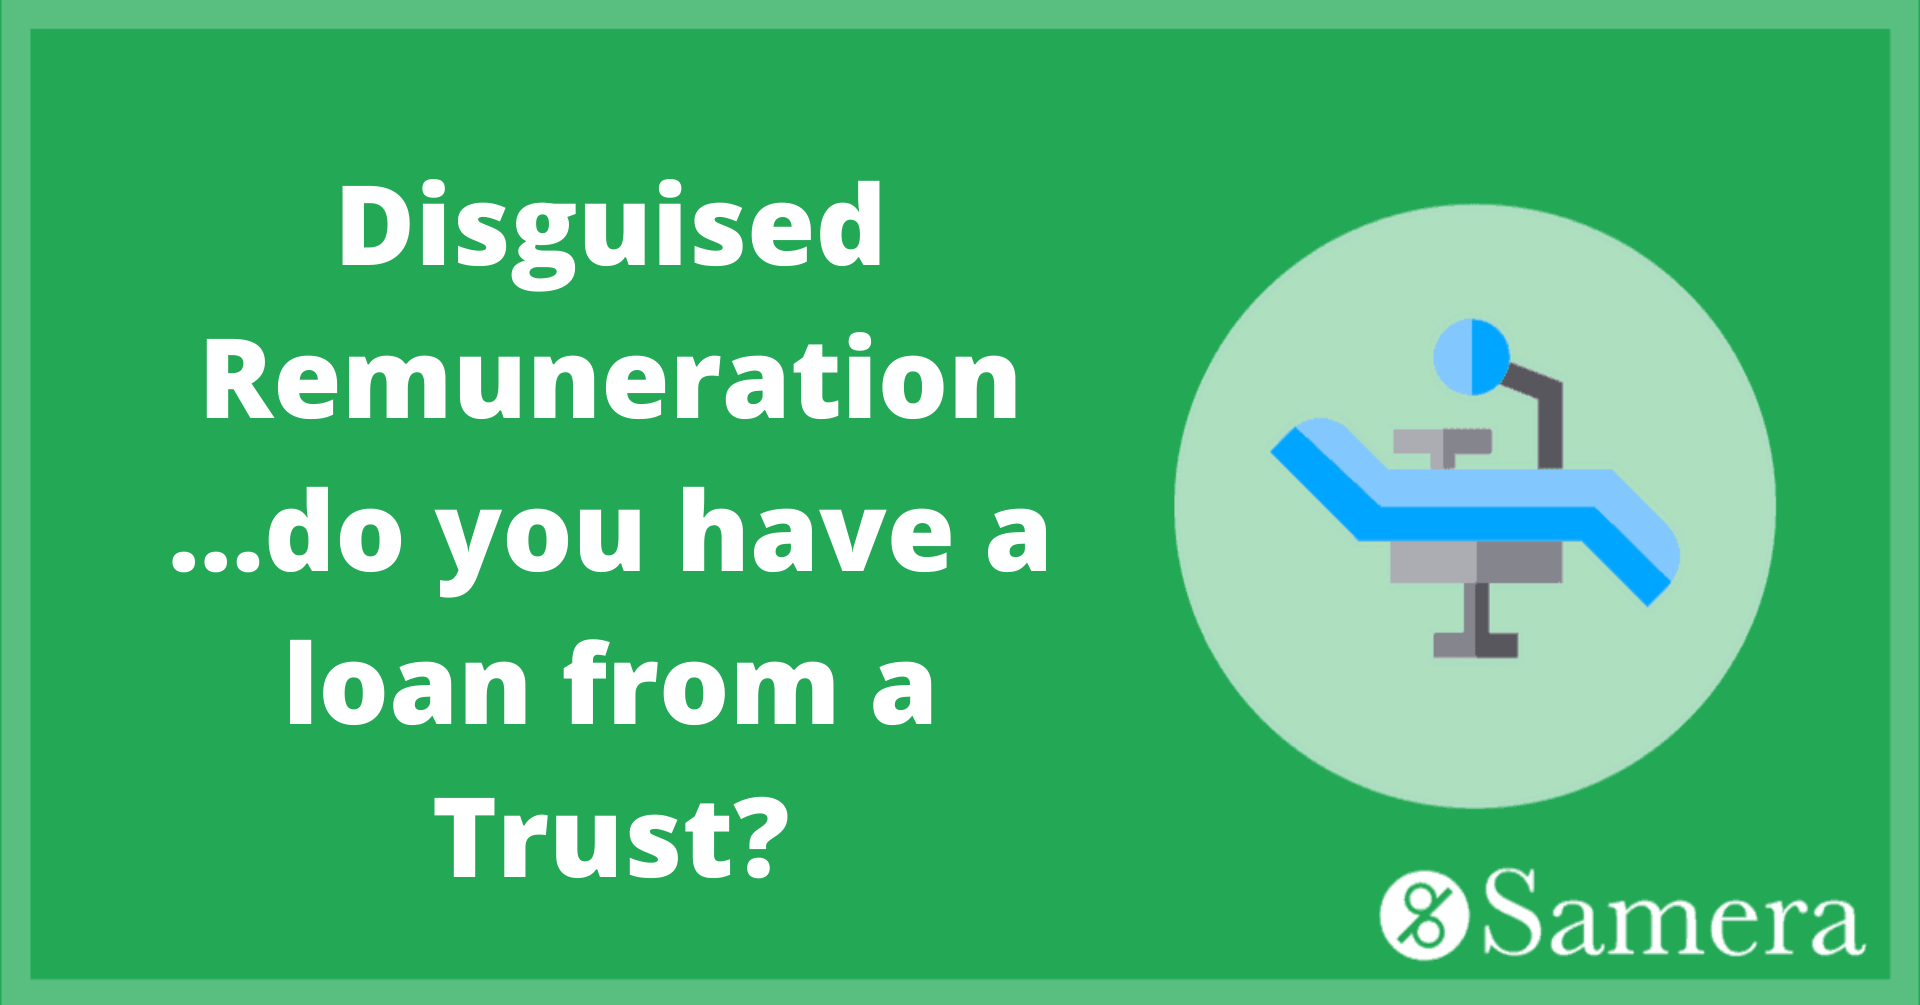 Disguised Remuneration ….do you have a loan from a Trust?